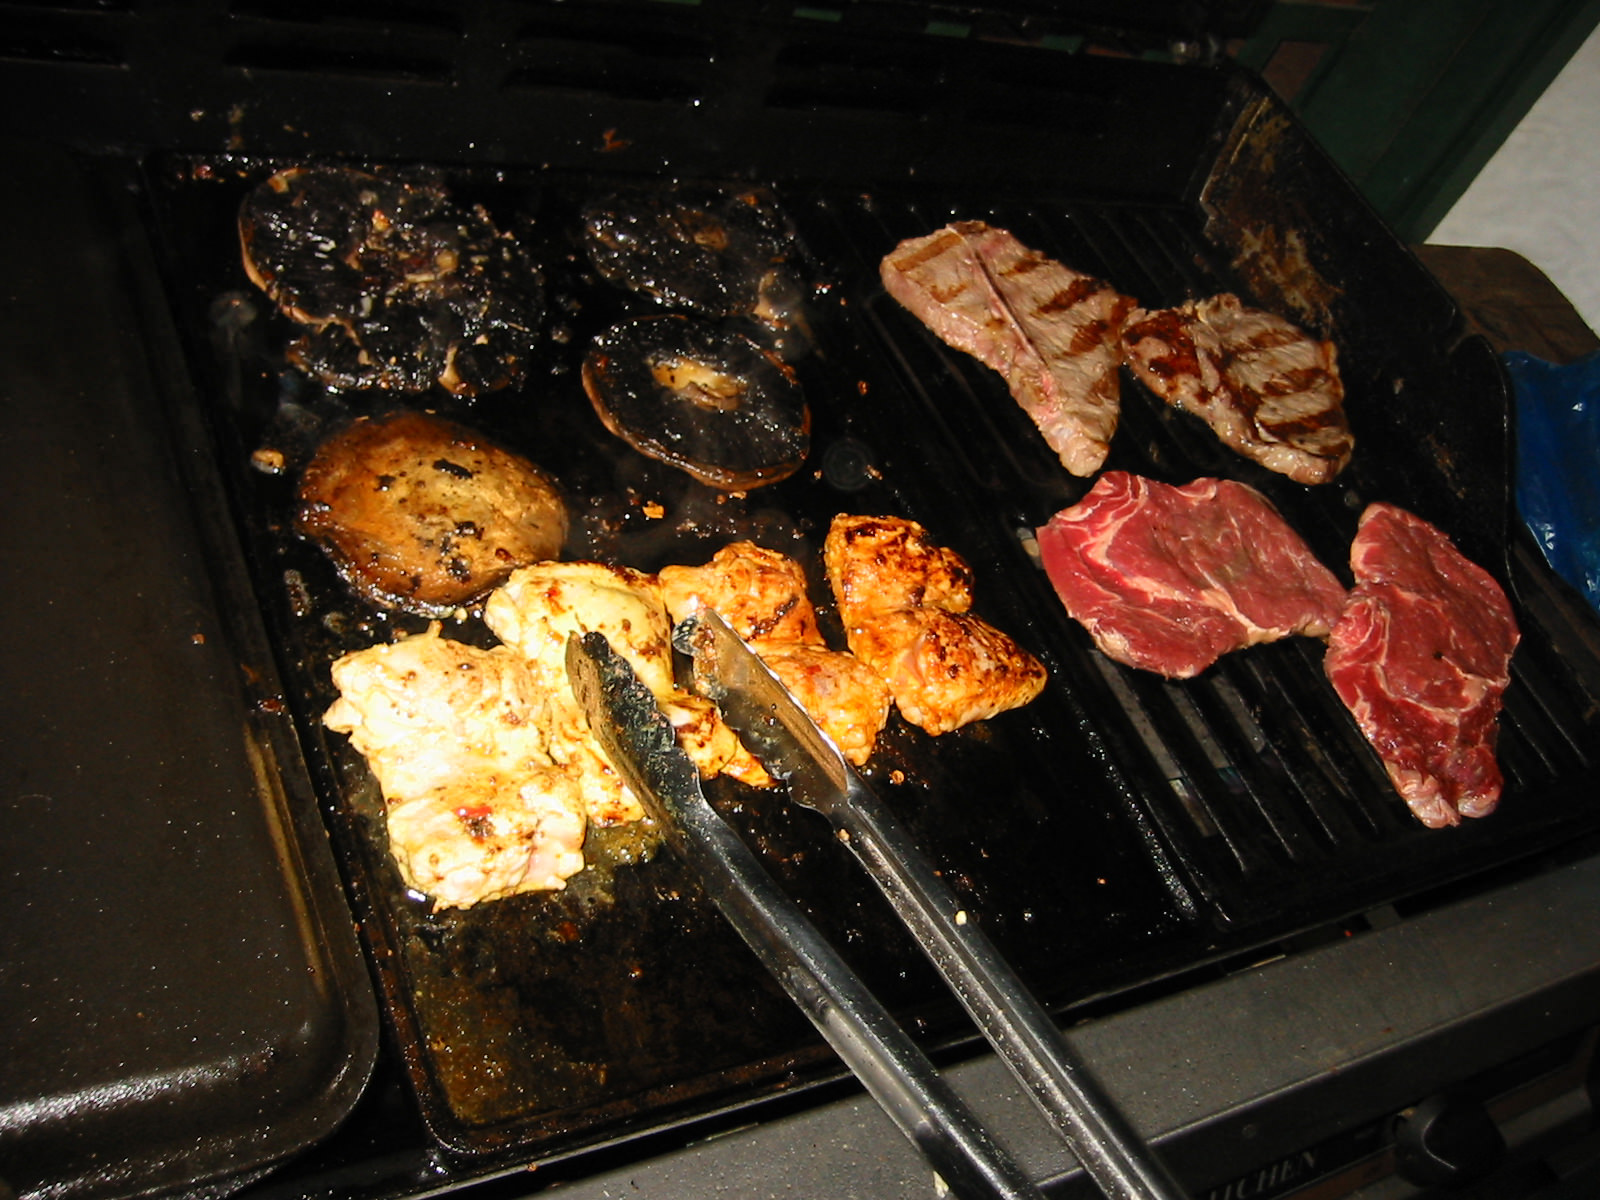 Mushrooms, chicken and steak on the barbie